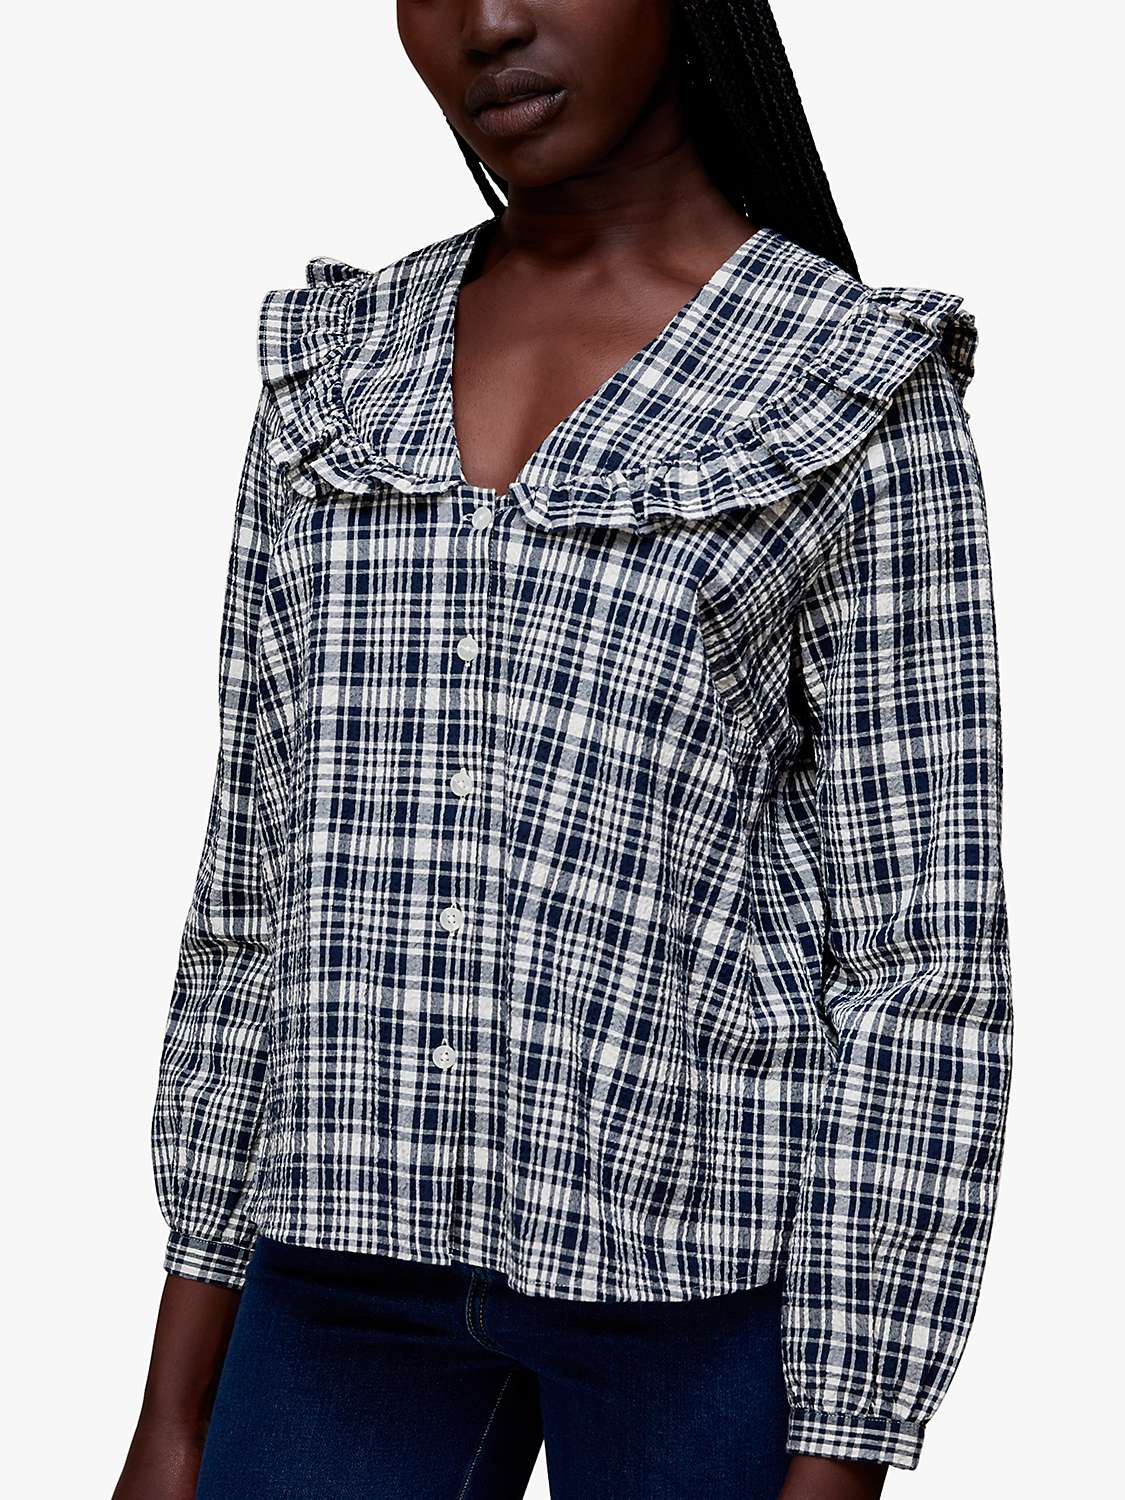 Buy Whistles Wide Collar Check Shirt, Navy/Multi Online at johnlewis.com